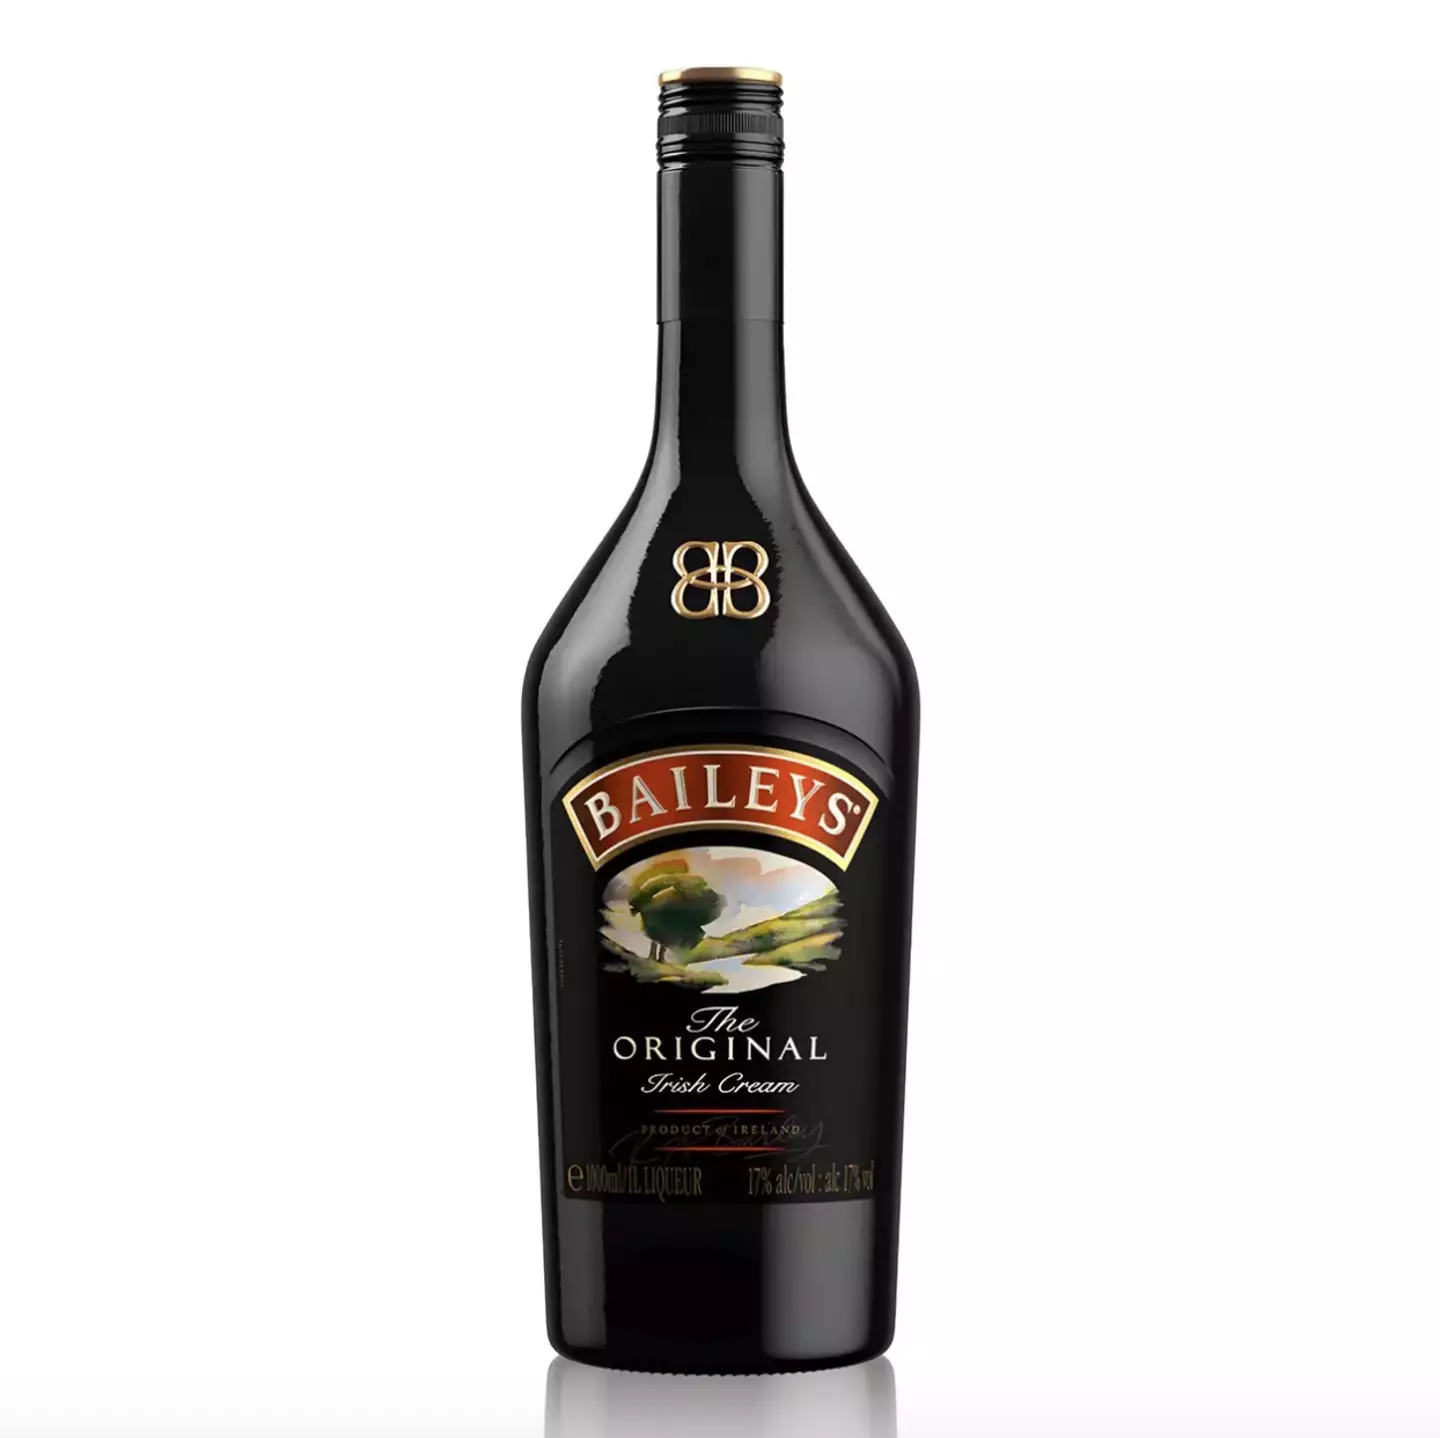 The addition of Baileys Irish Cream to Kaelyn's recipe makes it the perfect Christmas cocktail.